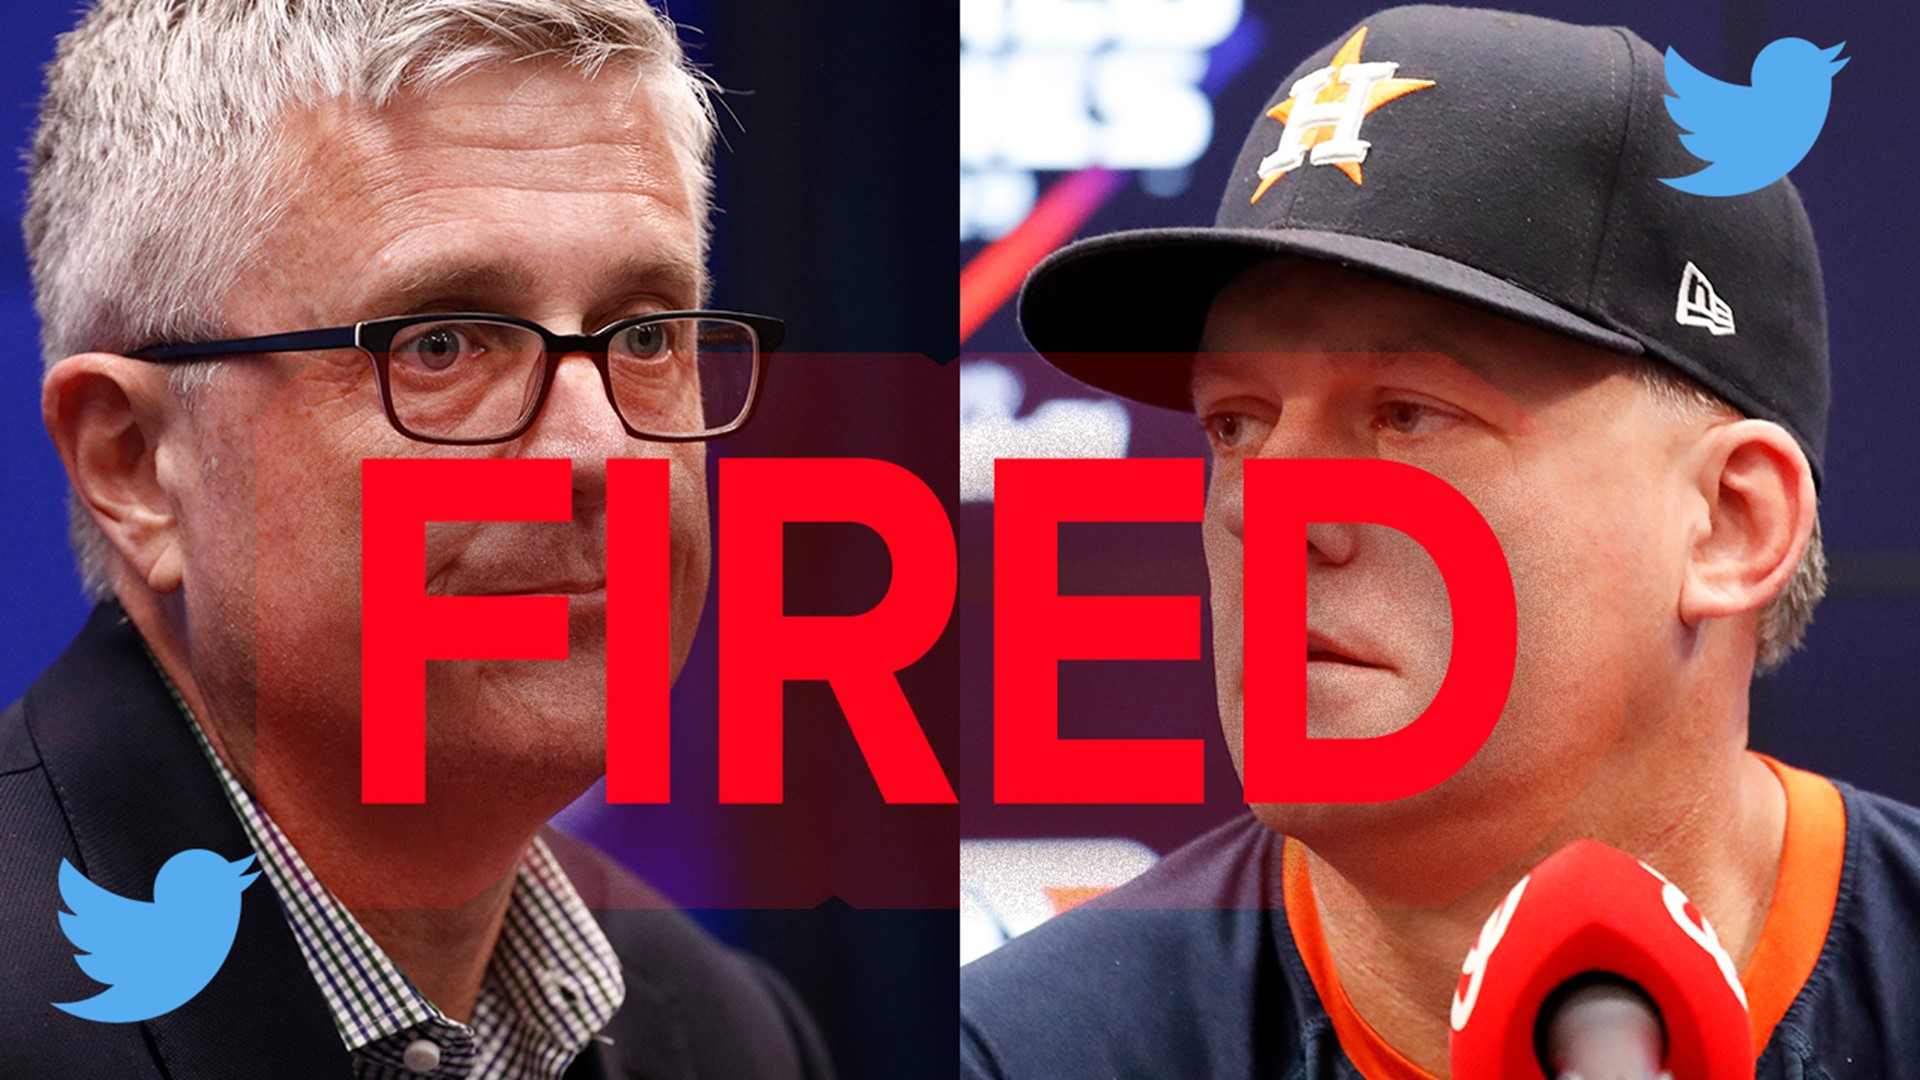 Luhnow and Hinch are suspended for the 2020 season and the Astros will also be fined $5 million and will lose its 1st- and 2nd-round draft picks the next two seasons